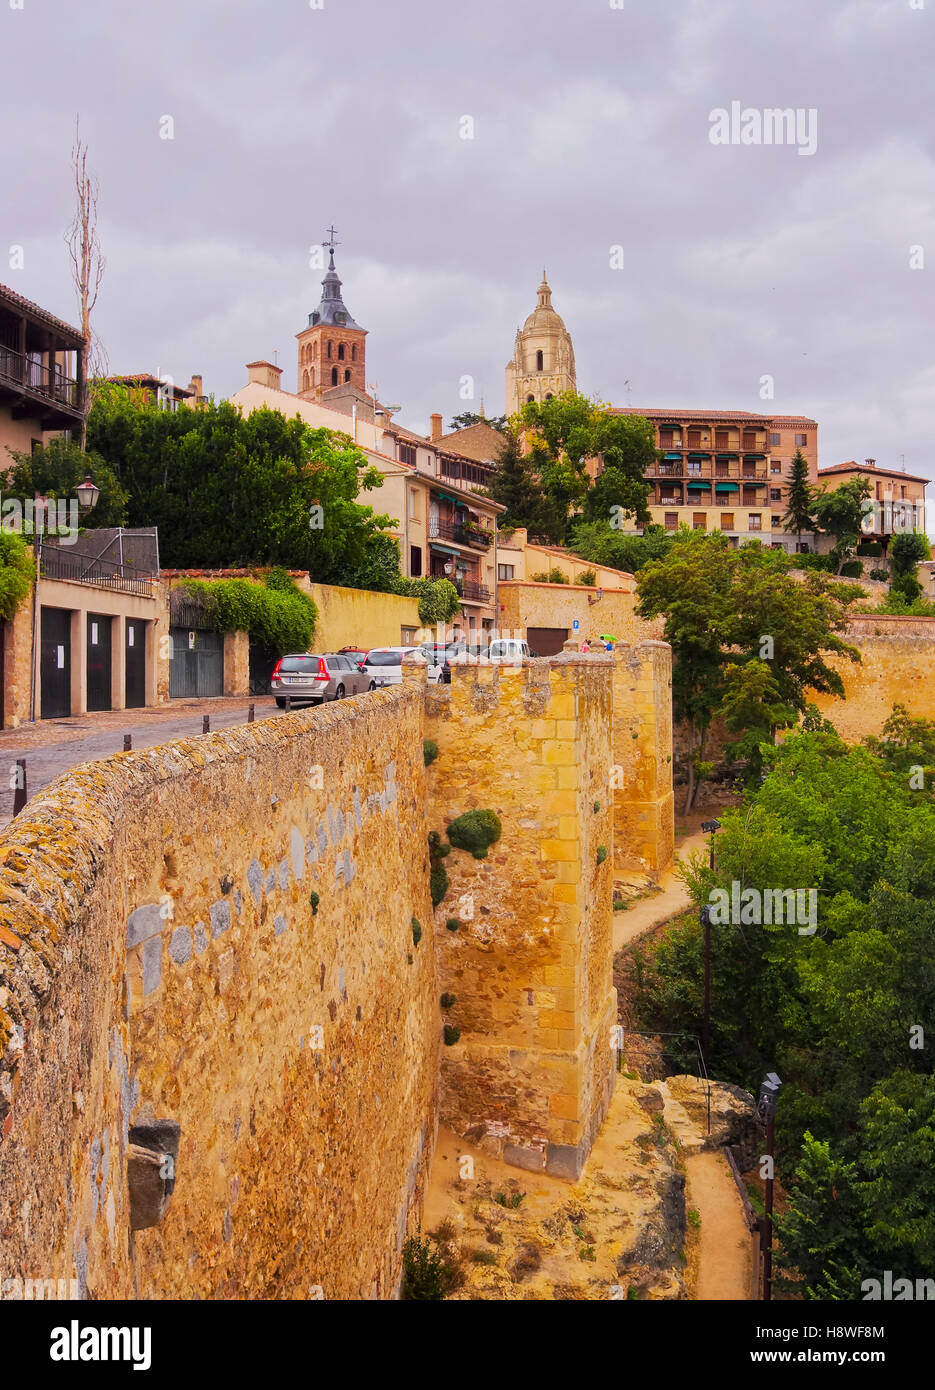 Spain, Castile and Leon, Segovia, View of the old town. Stock Photo